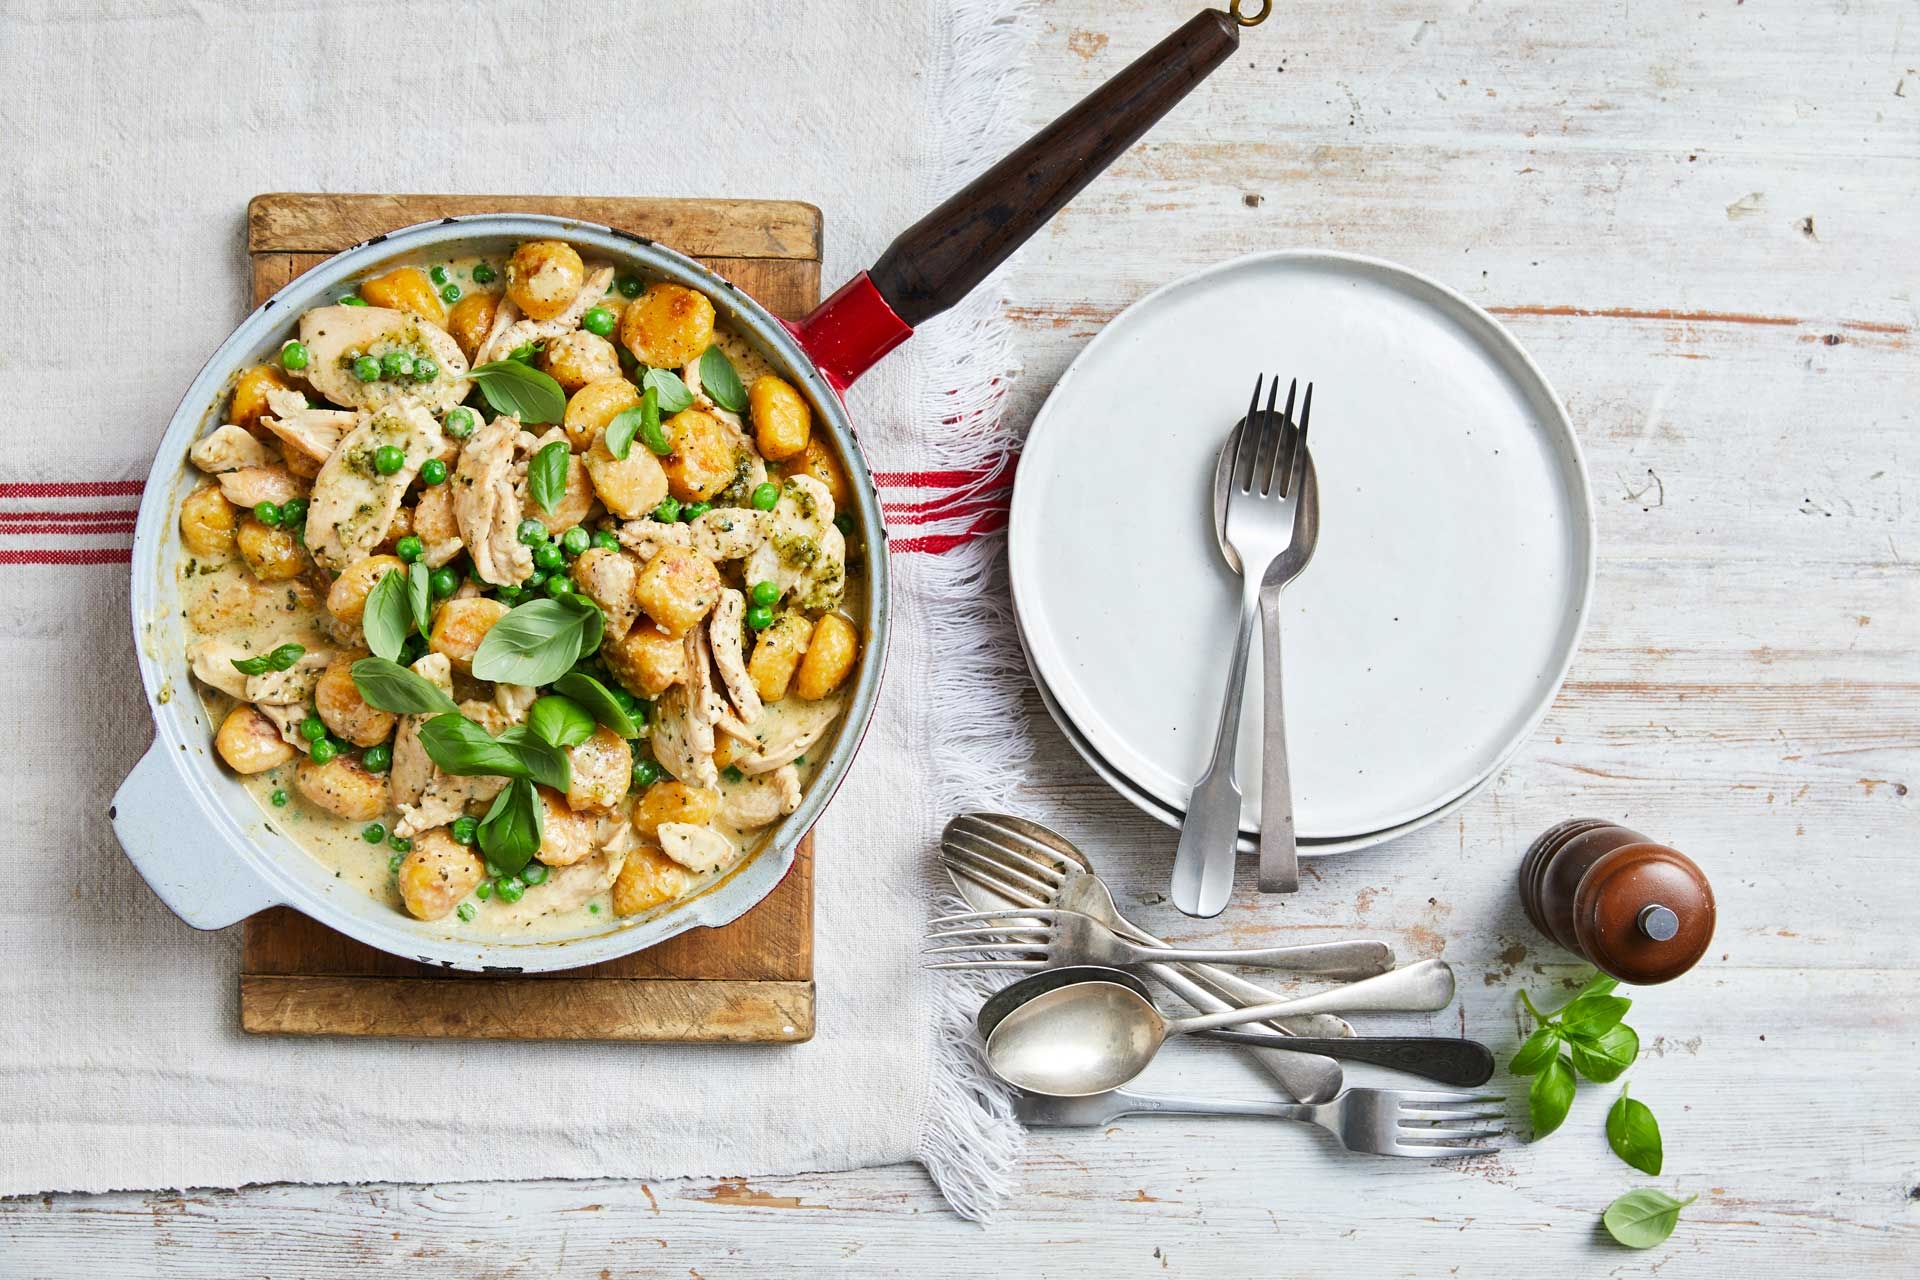 A delicious pan of food with savoury tender chicken and colorful vegetables with gnocchi, cooked to perfection.